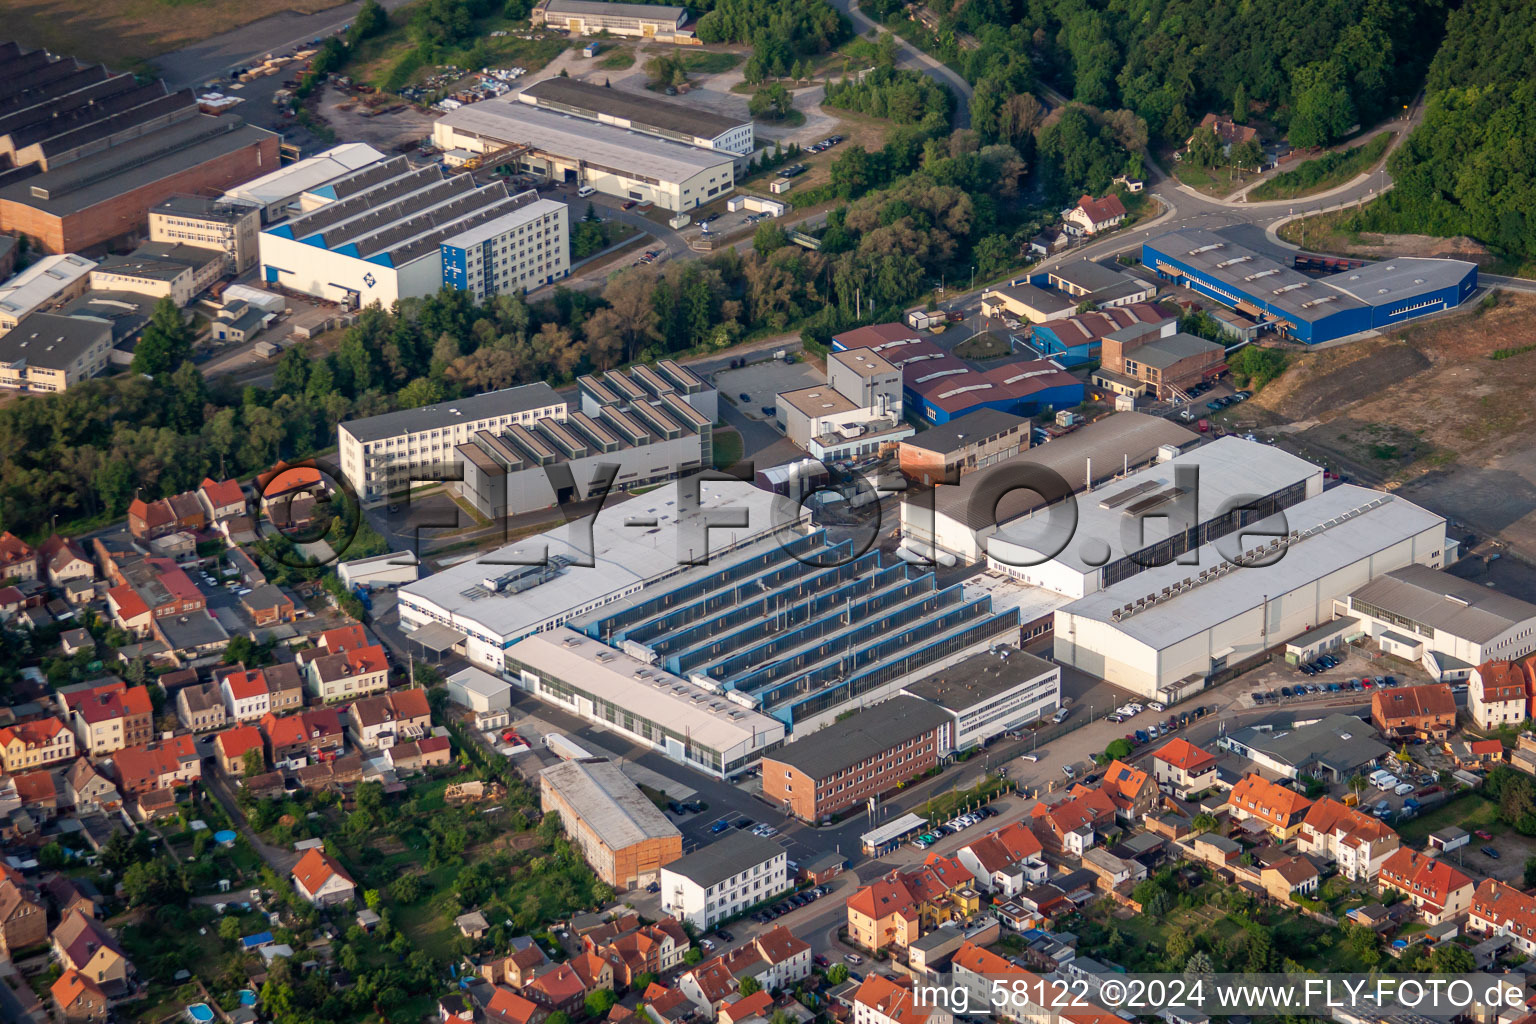 Building and production halls on the premises of Schunk Sintermetalltechnik GmbH in Thale in the state Saxony-Anhalt, Germany